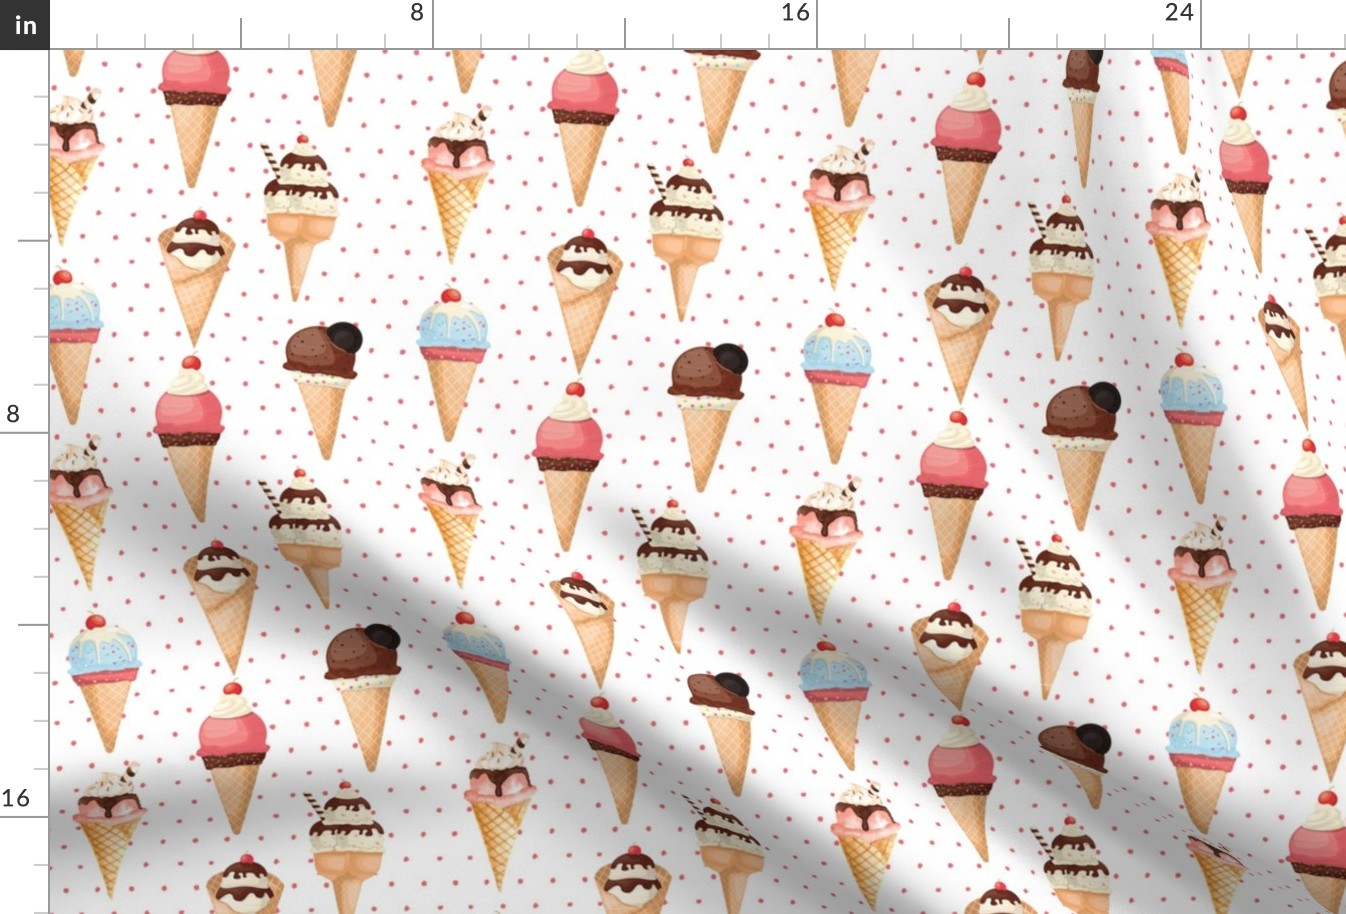 10" Watercolor Fruit Popsicles, Ice Cream, Popsicles fabric, ice cream fabric, summer fabric 3